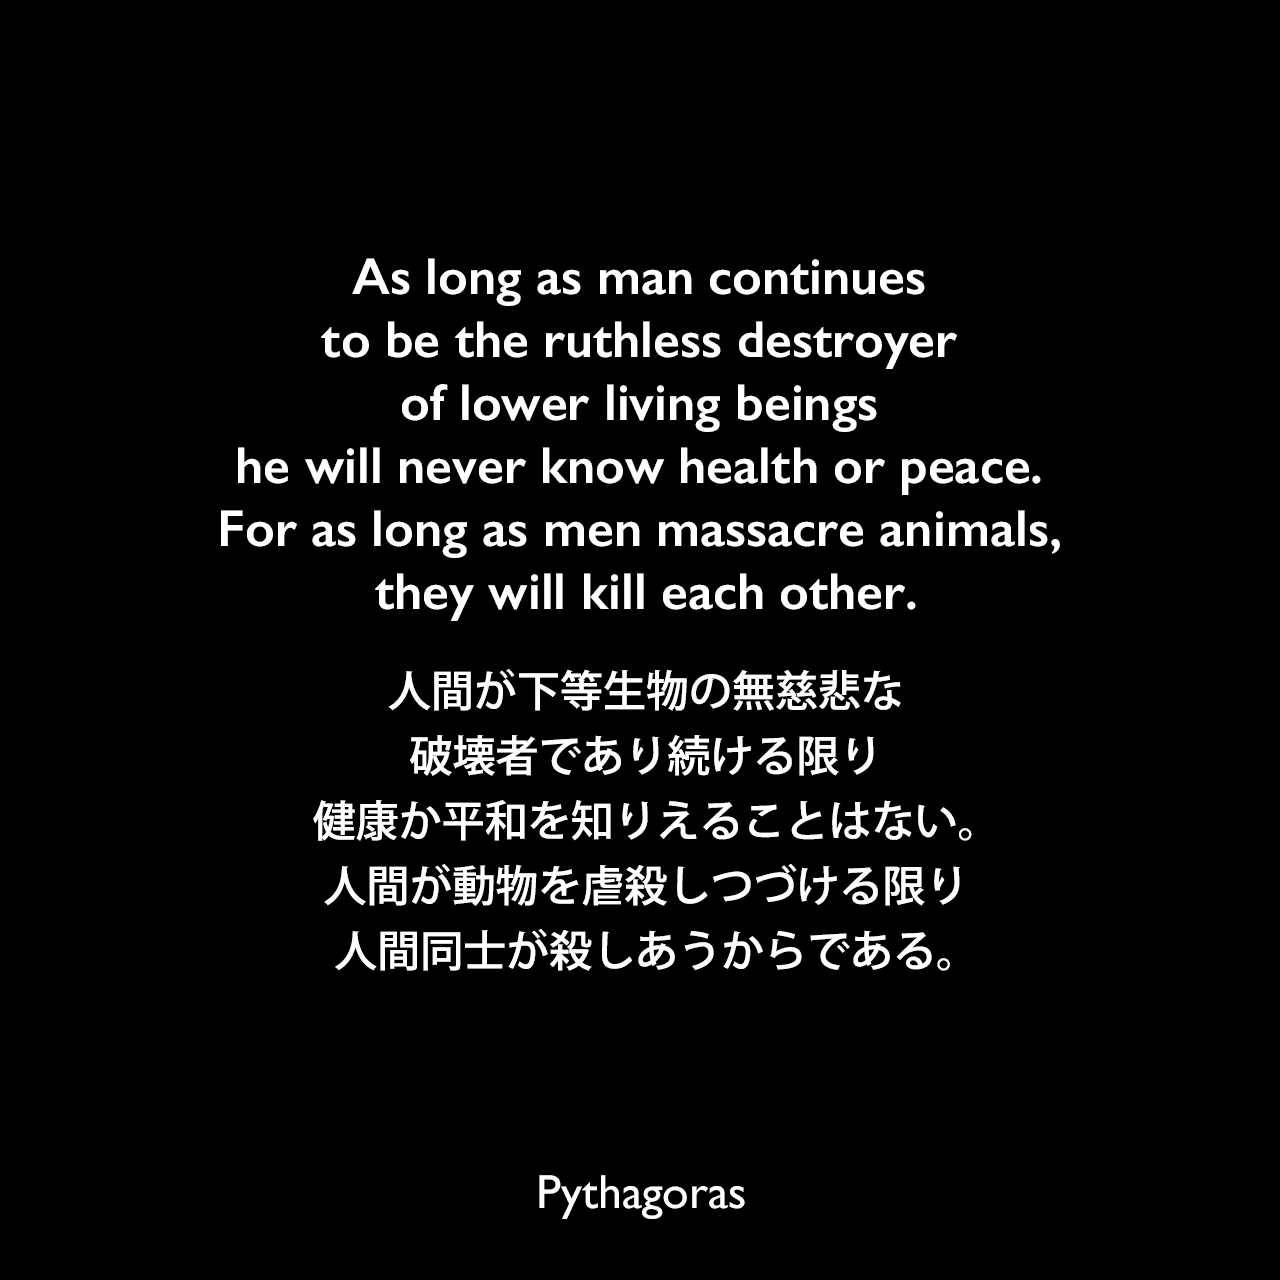 As long as man continues to be the ruthless destroyer of lower living beings he will never know health or peace. For as long as men massacre animals, they will kill each other.人間が下等生物の無慈悲な破壊者であり続ける限り、健康か平和を知りえることはない。人間が動物を虐殺しつづける限り、人間同士が殺しあうからである。Pythagoras